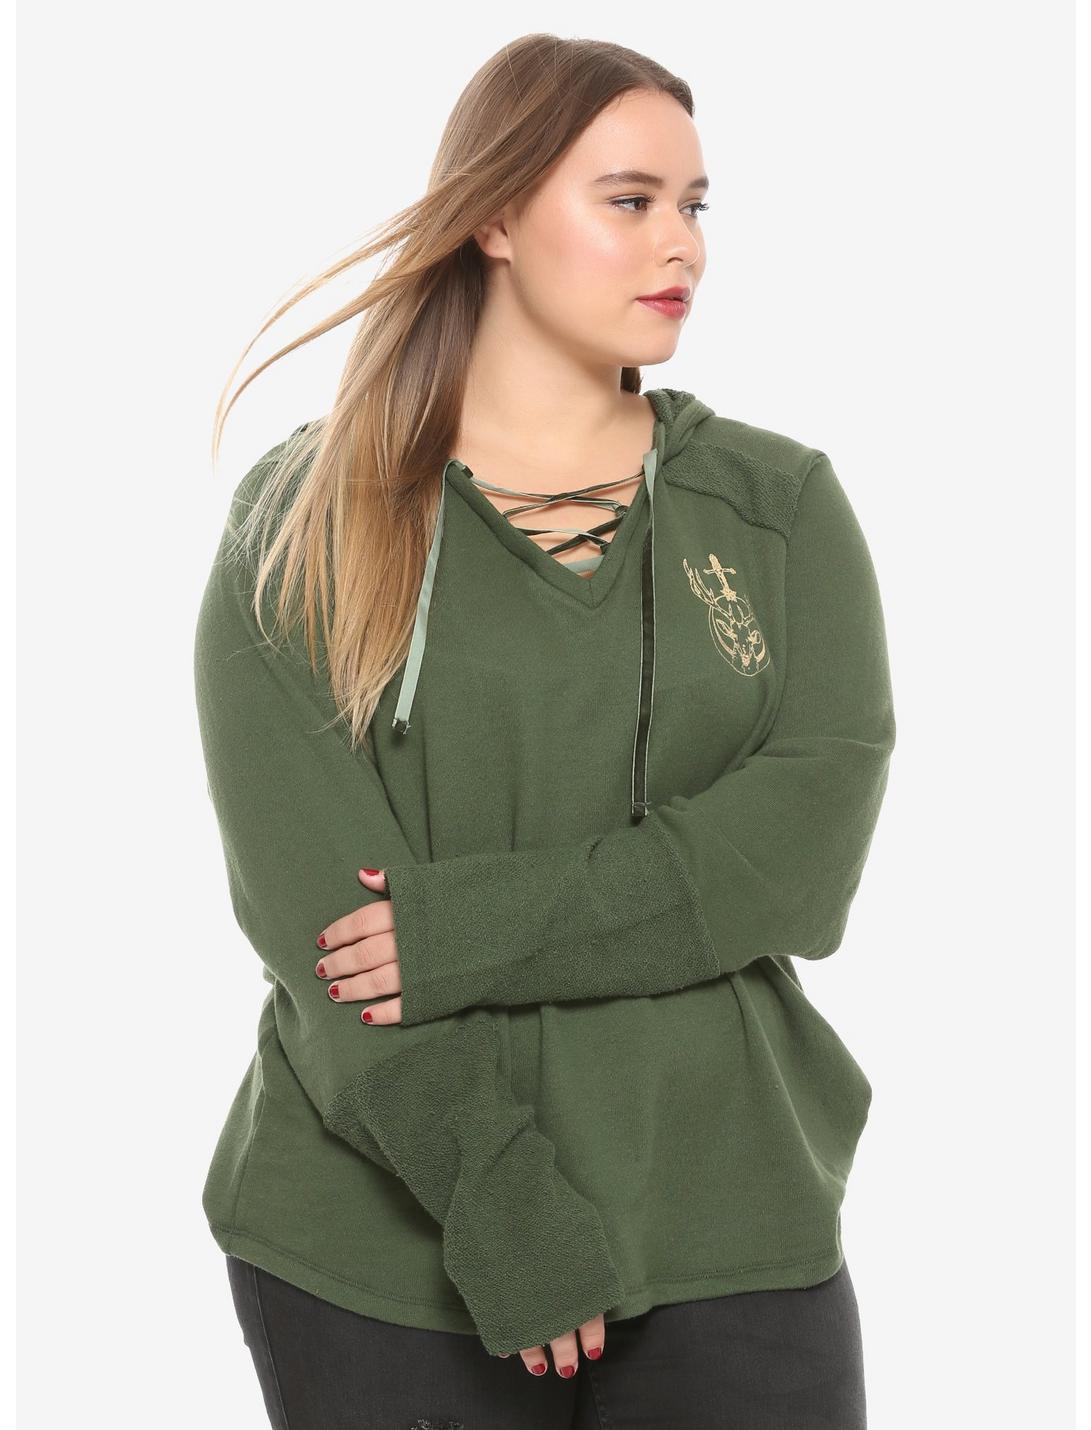 Outlander Lace-Up Girls Hoodie Plus Size Hot Topic Exclusive, DARK GREEN, hi-res